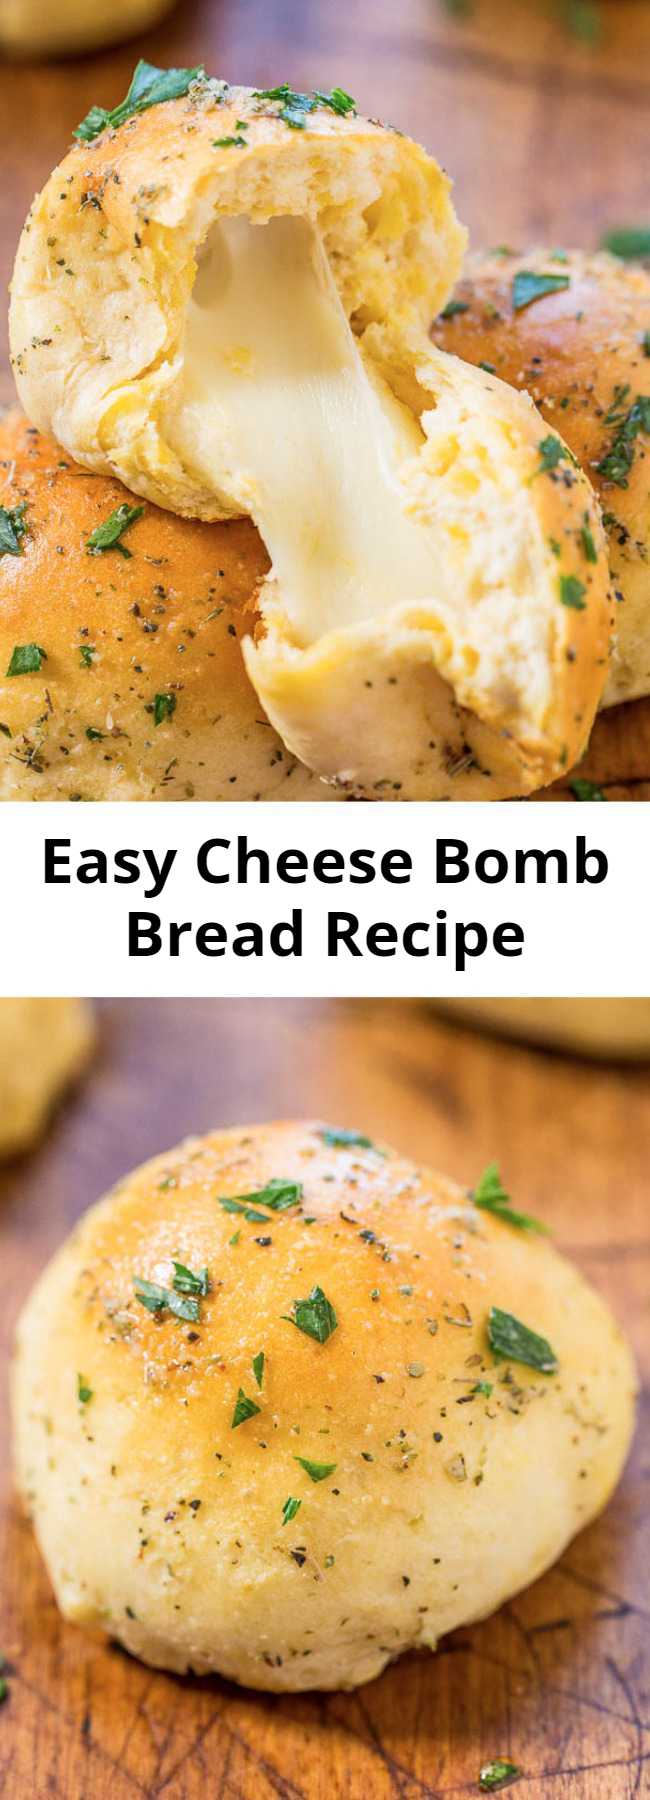 Easy Cheese Bomb Bread Recipe - Soft, buttery bread brushed with garlic butter and stuffed with CHEESE! So good, mindlessly easy, goofproof, and ready in 10 minutes! A hit with everyone!!